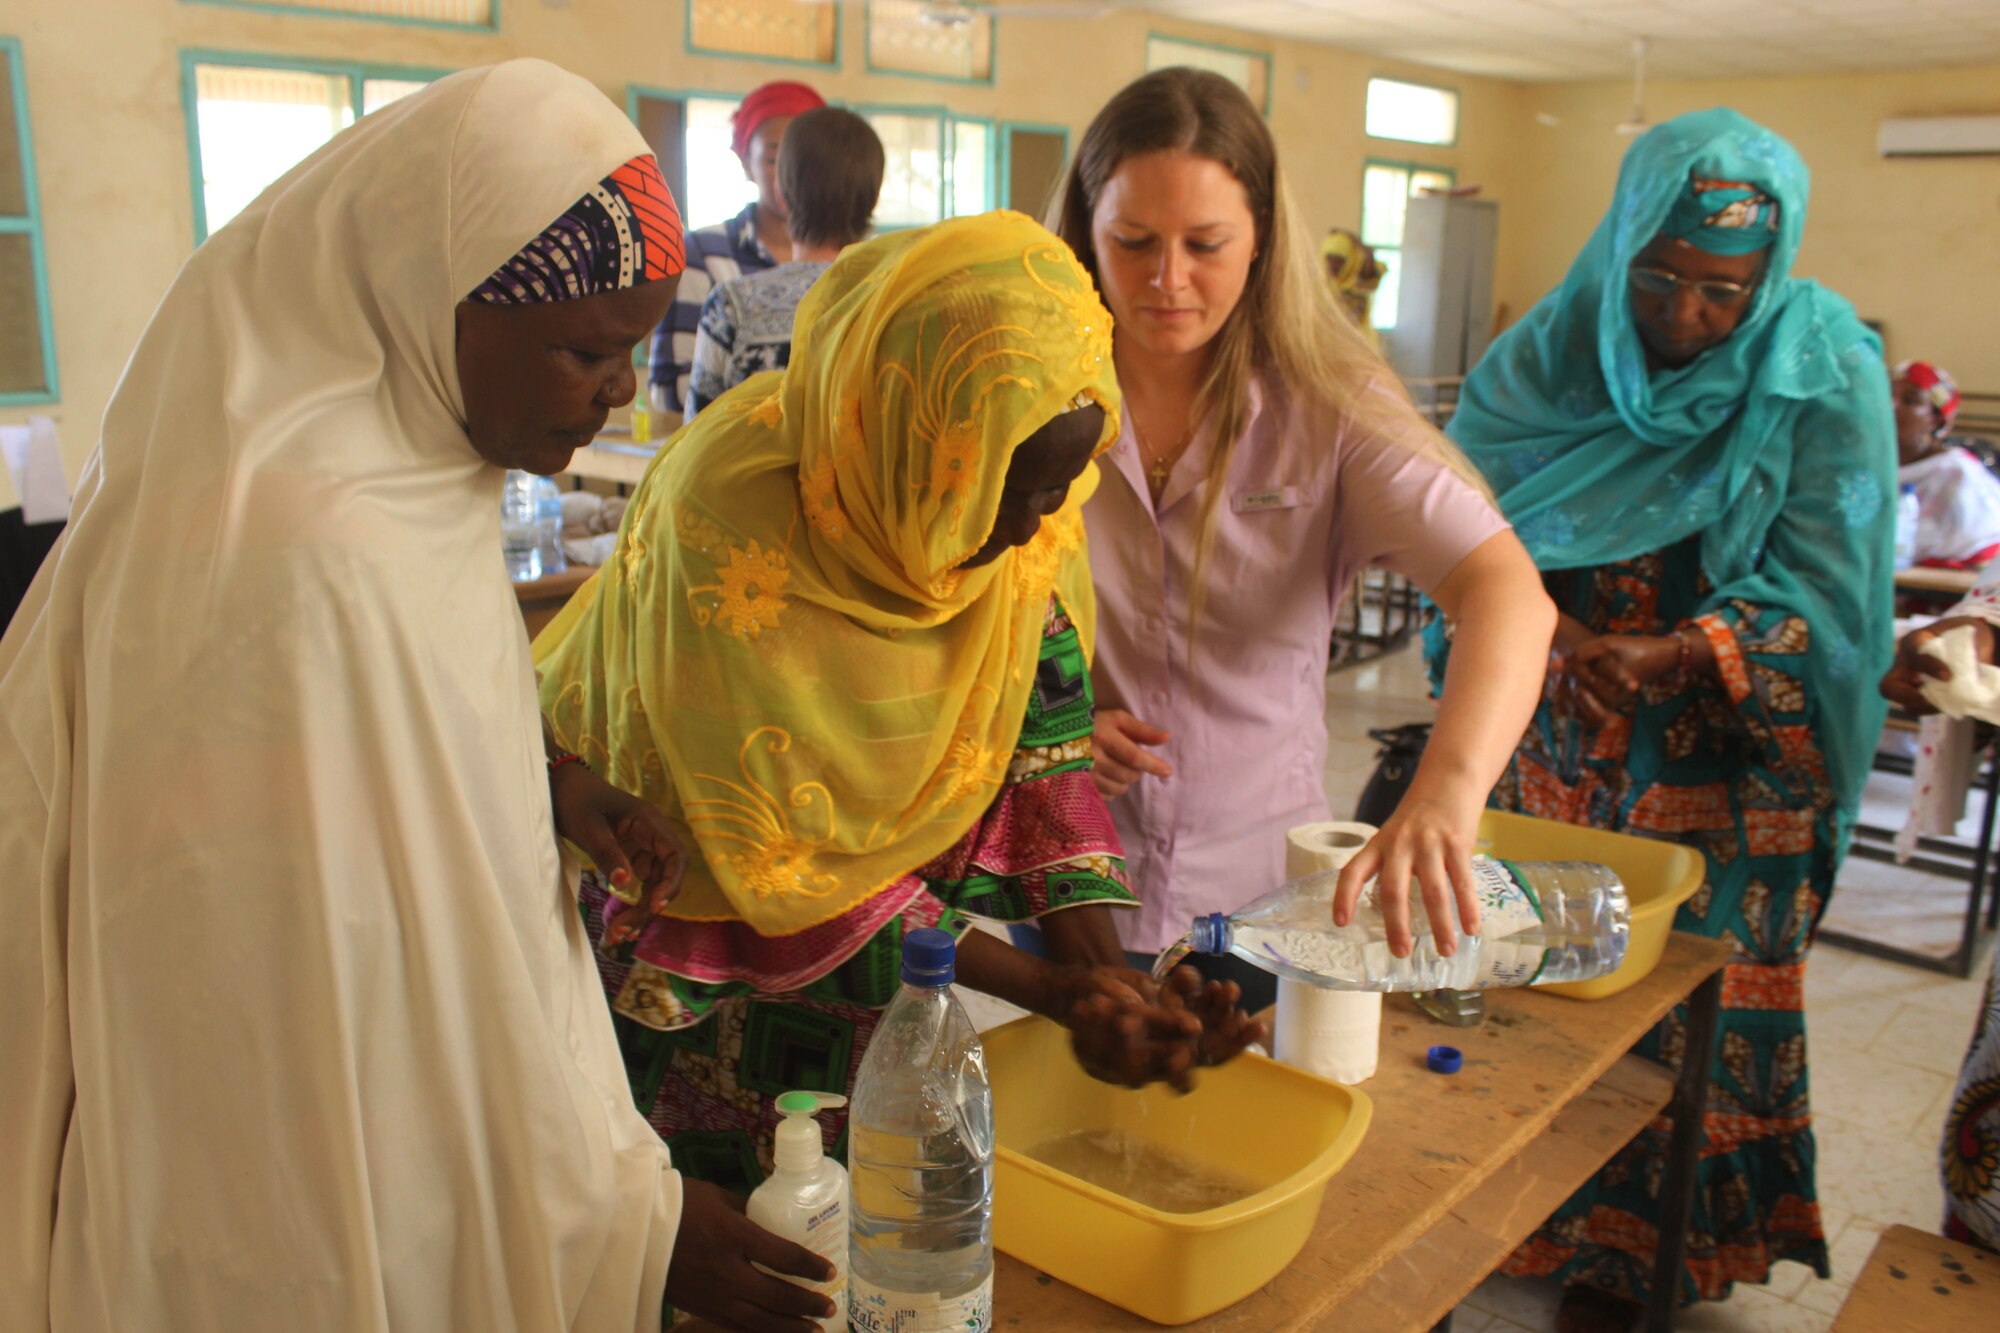 The 724th Expeditionary Air Base Squadron medical section conducted a three-day women’s hygiene class for 25 women from the Association of Nigerien Women Against War from Aug. 12 to Aug. 14, 2017, in Agadez, Niger.